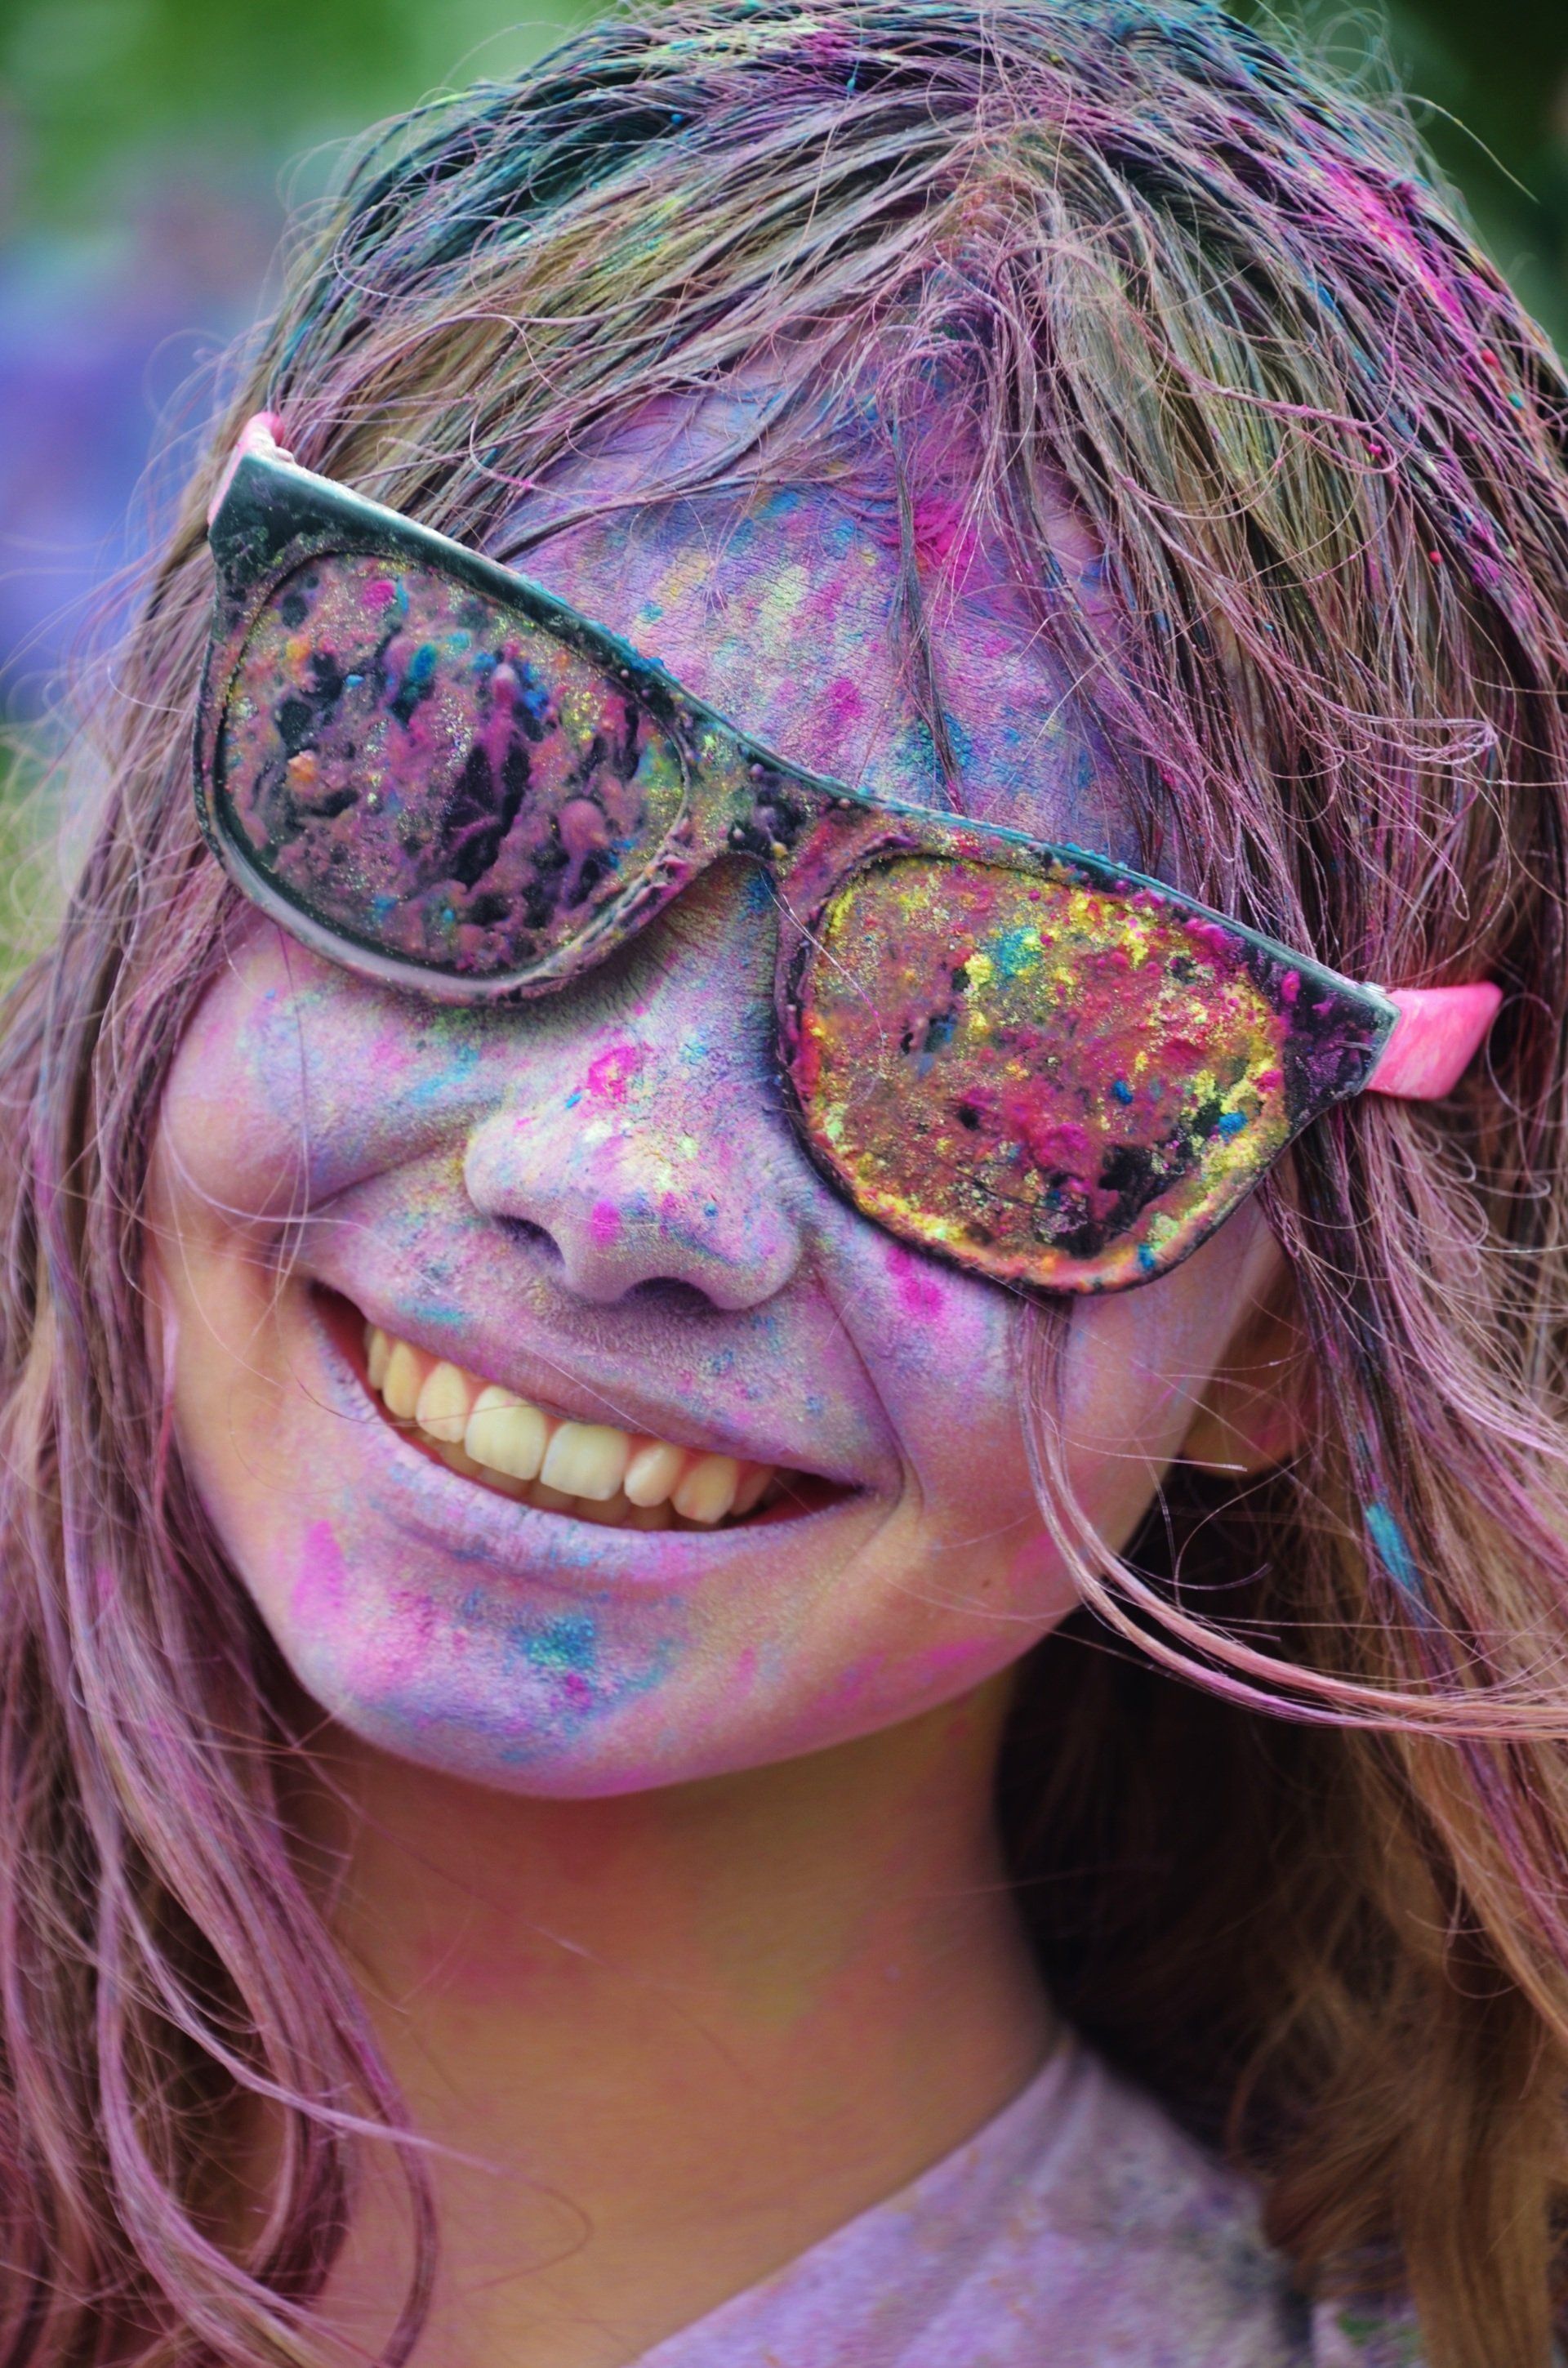 a close up of a girl wearing sunglasses and covered in colored powder .